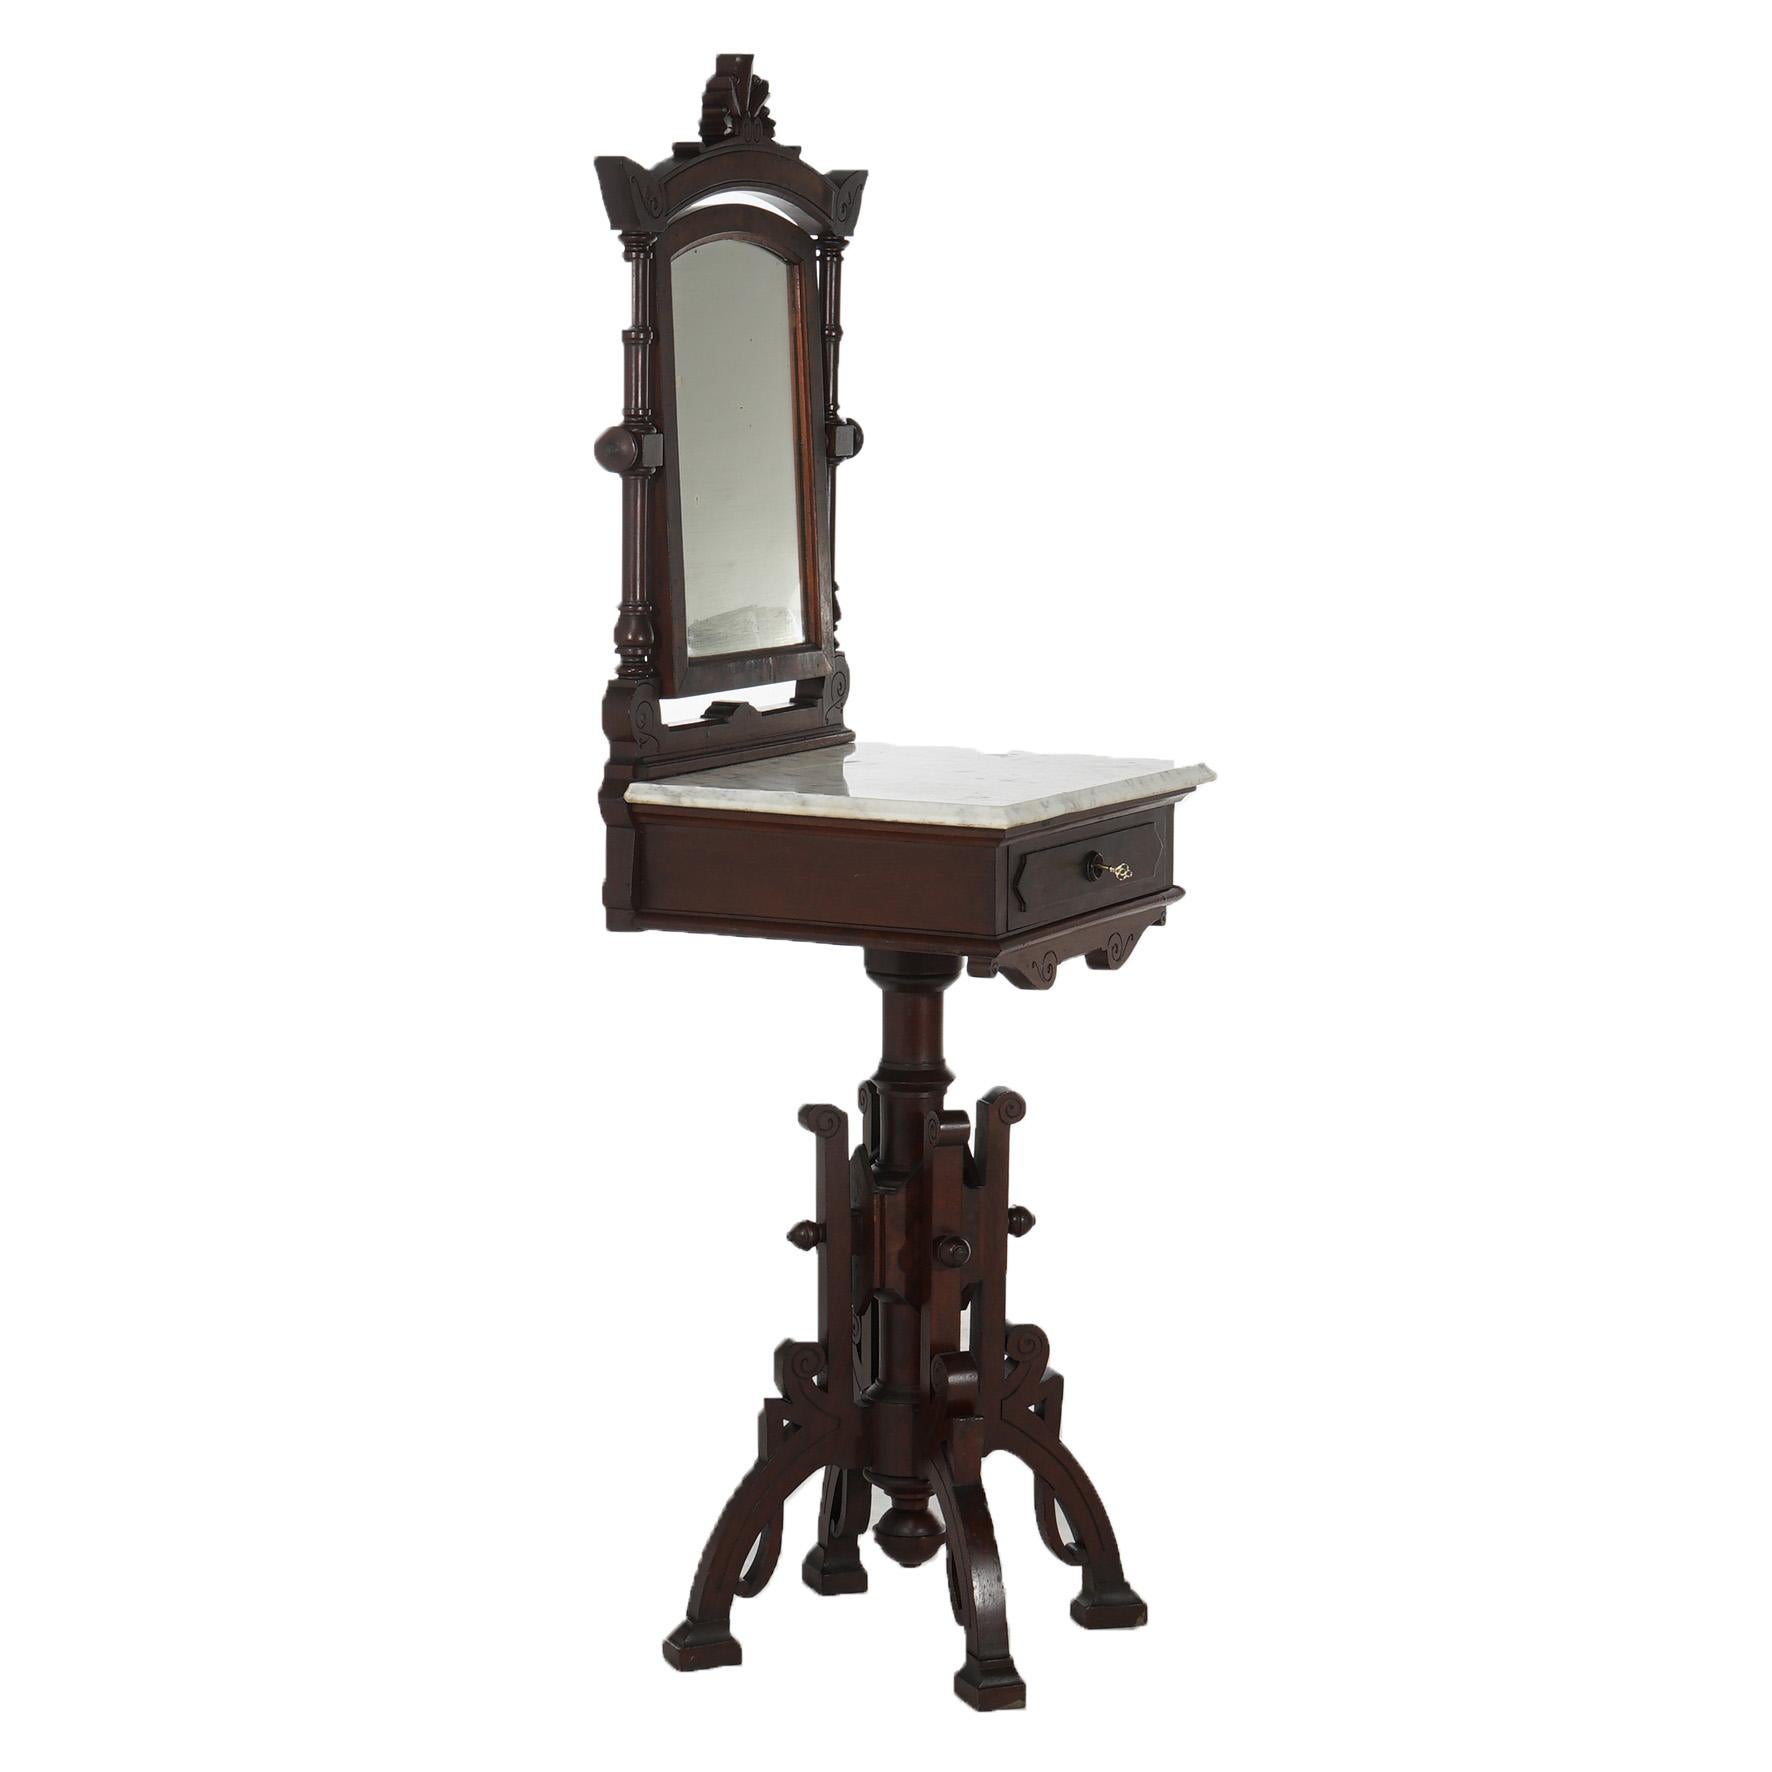 Antique Victorian Renaissance Revival Floor Model Carved Walnut, Burl & Marble Top Shaving Mirror with Single Drawer, 19thC

Measures- 66.25''H x 20.5''W x 19''D